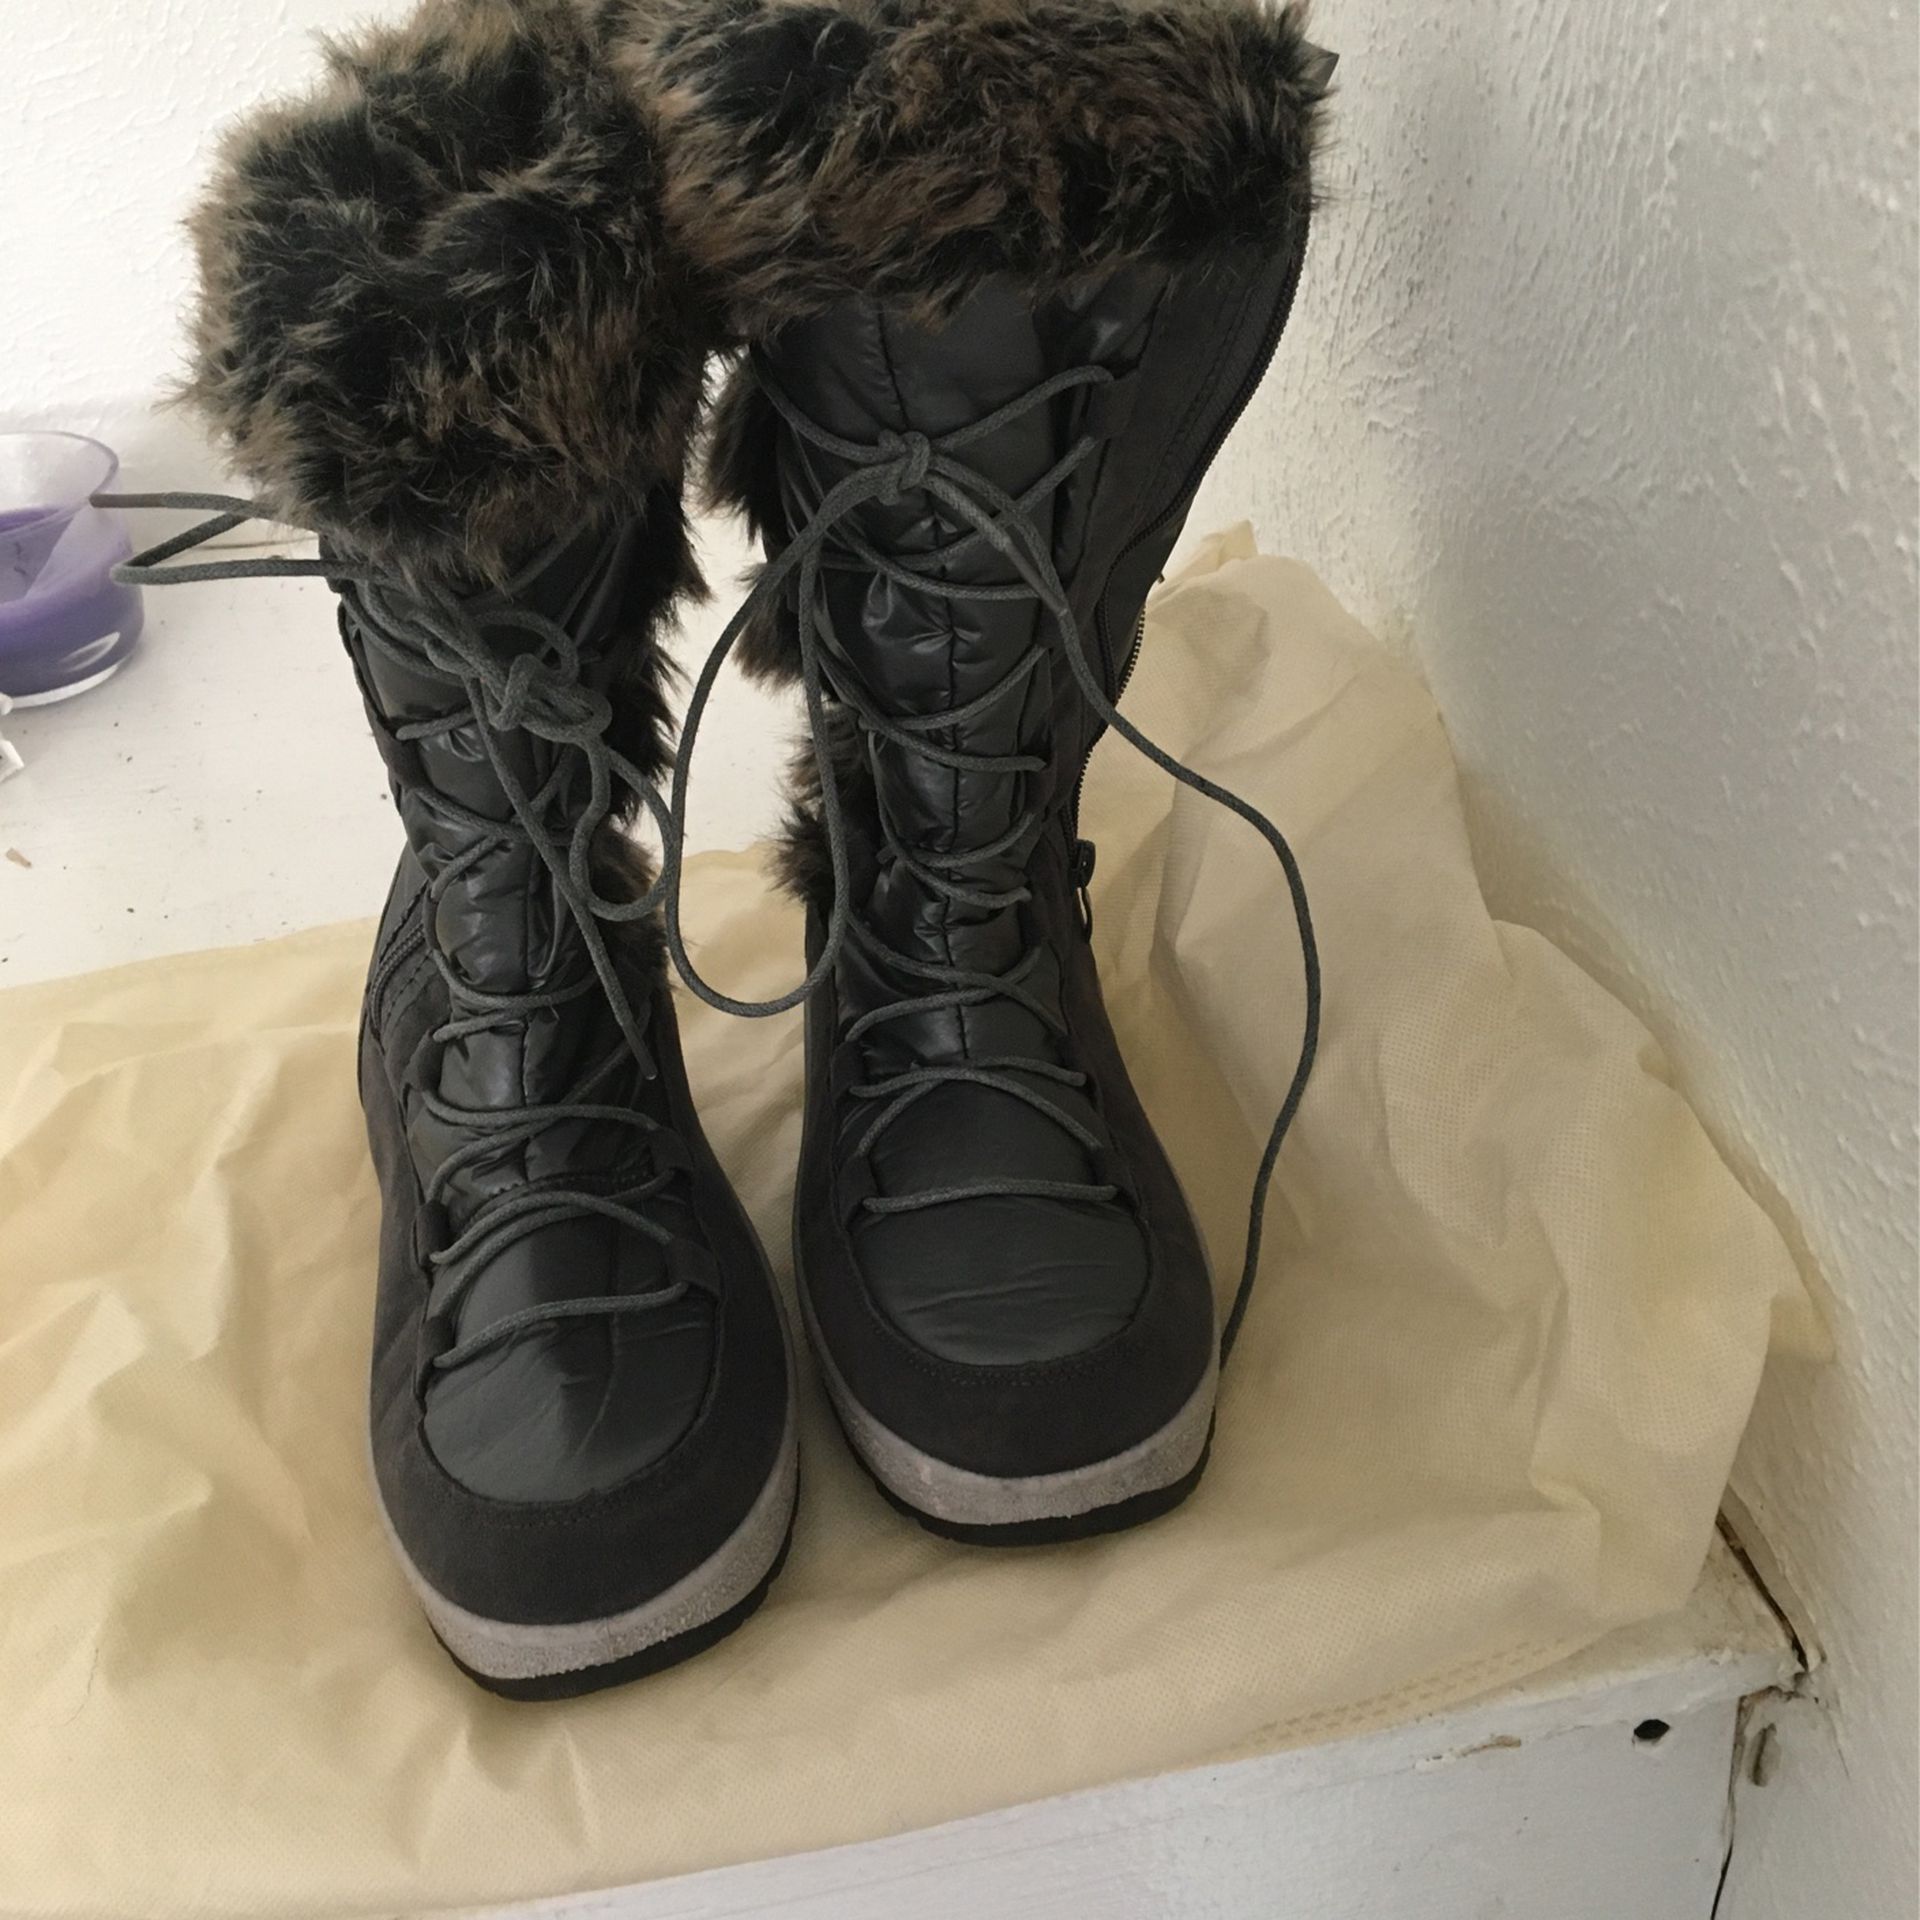 Snow Boots For Women 